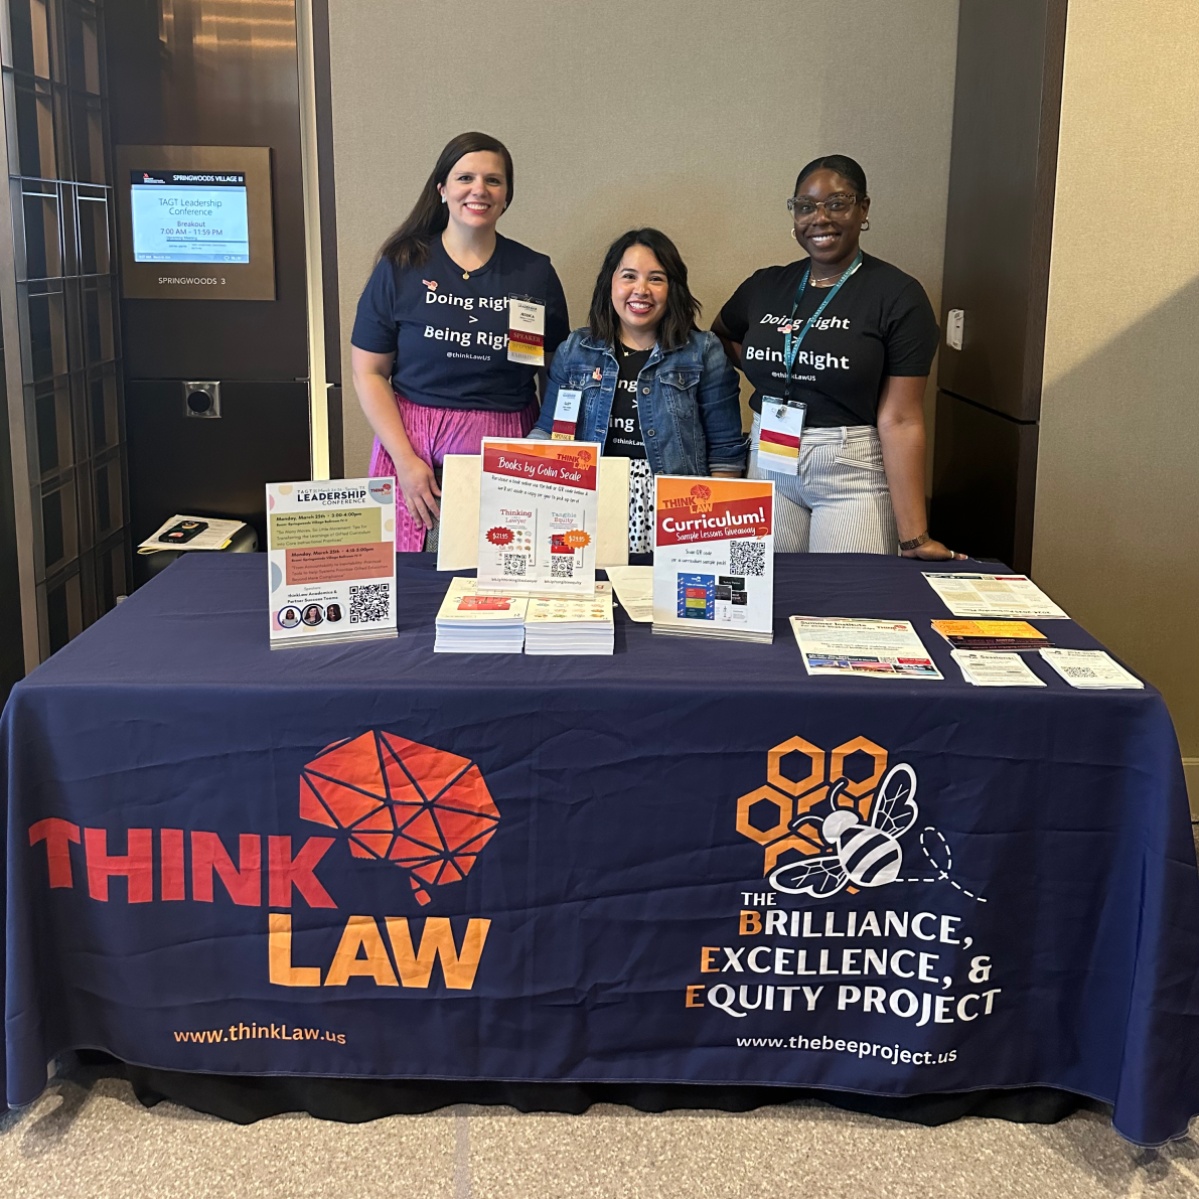 Good morning, @TXGifted! Come find Jessica, Gaby, and Tabitha at the thinkLaw booth and be sure to check out their sessions this afternoon at 3:00 and 4:15 p.m. for some professional learning.